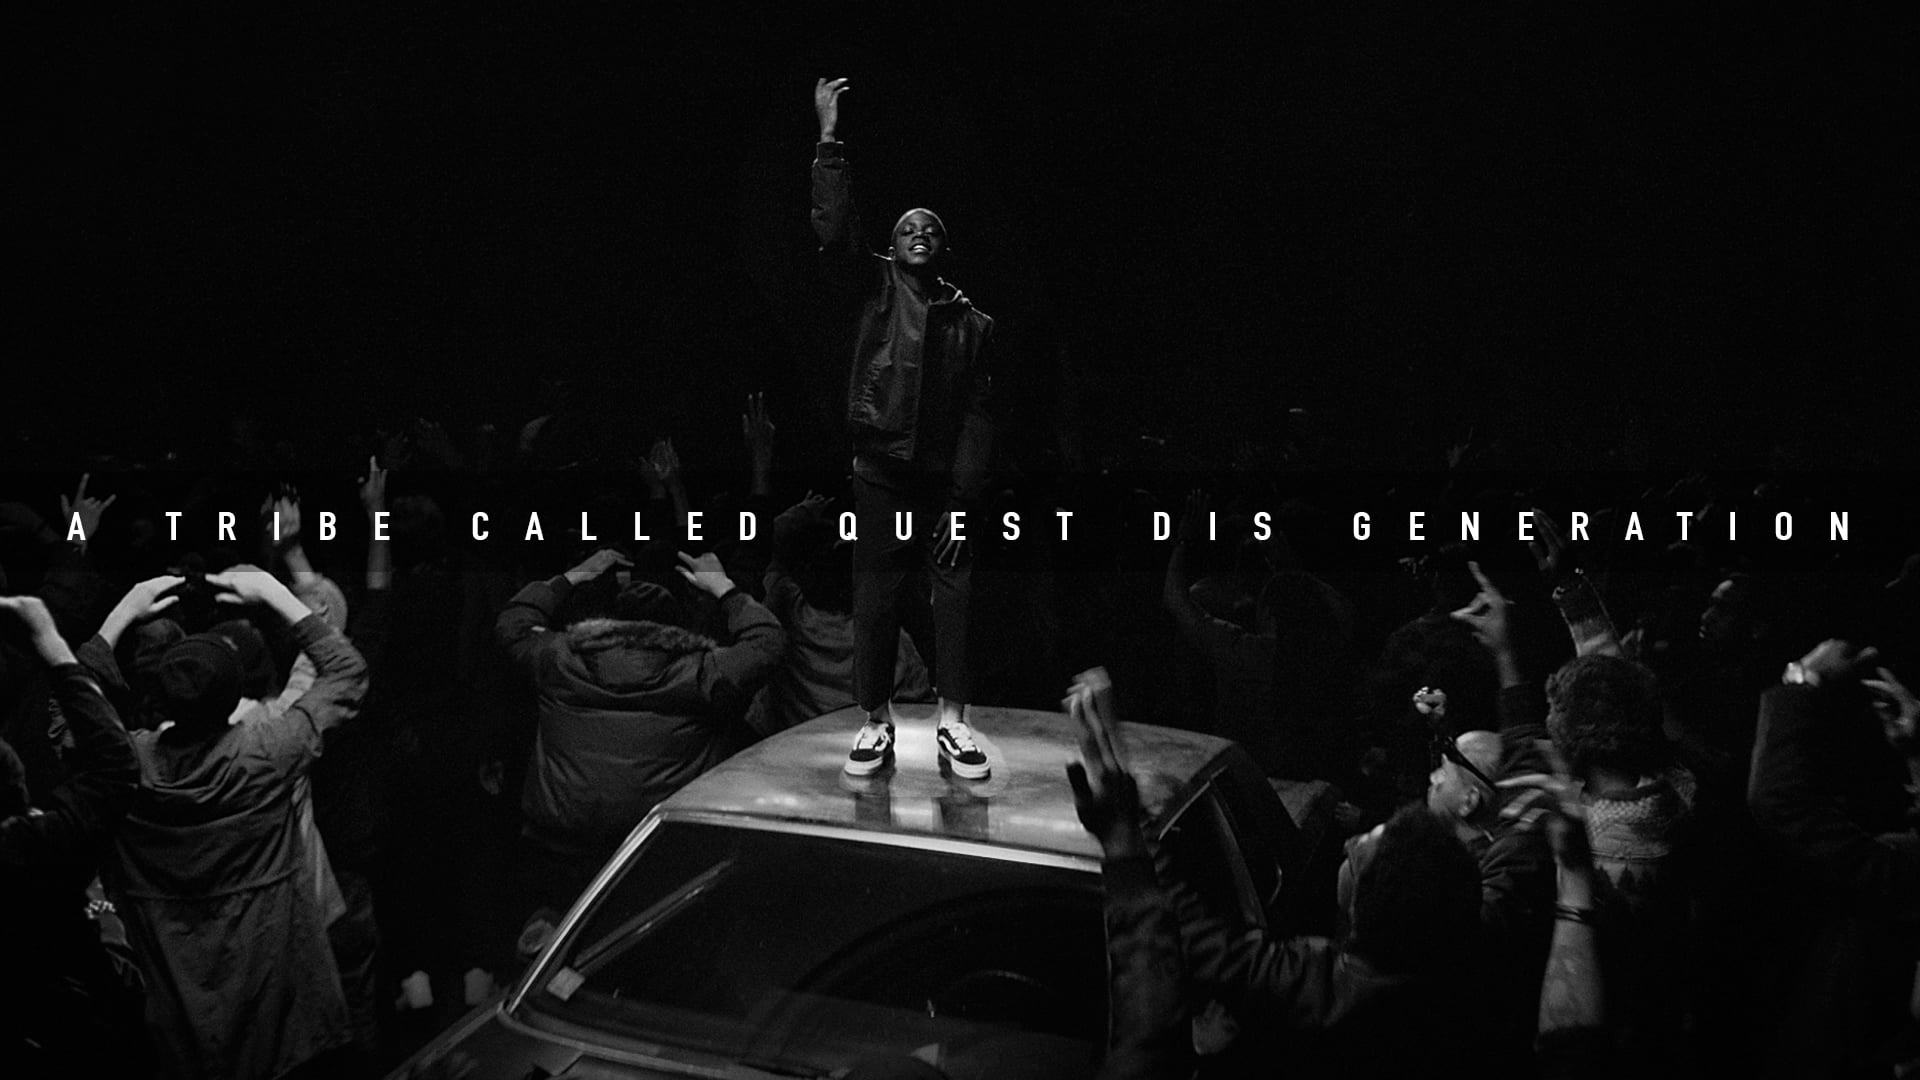 A Tribe Called Quest - Tribe Called Quest Dis Generation , HD Wallpaper & Backgrounds